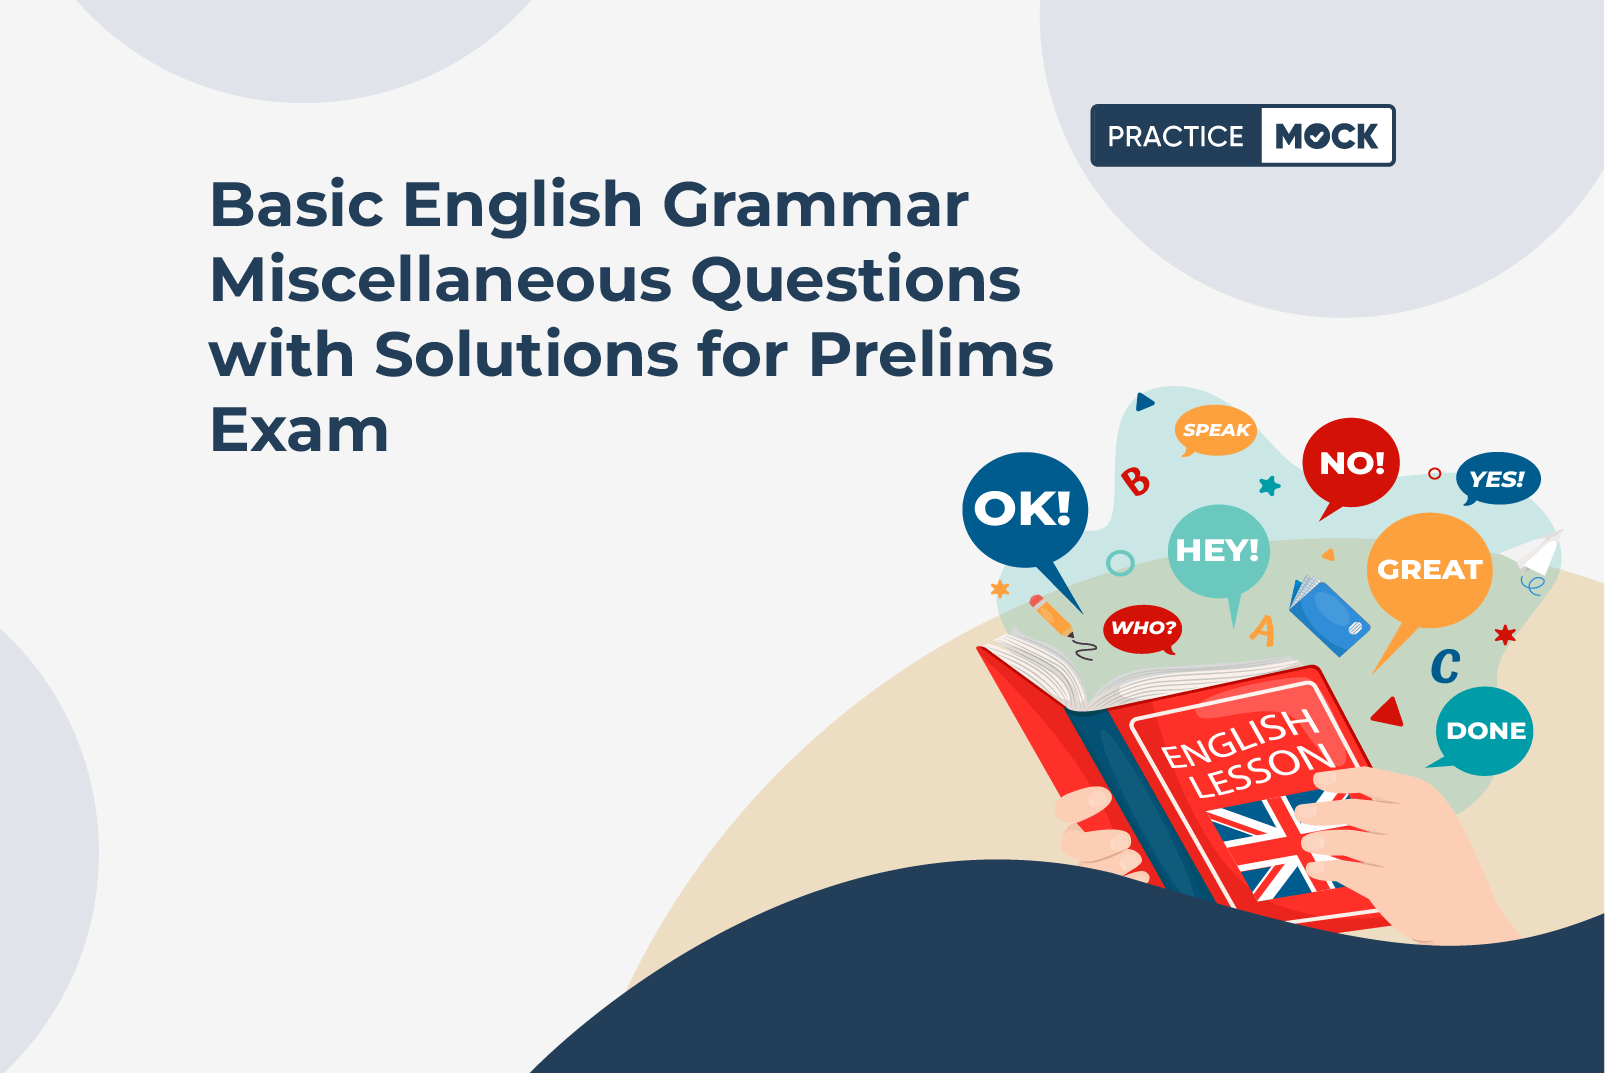 Basic English Grammar Miscellaneous Questions with Solutions for Prelims Exam